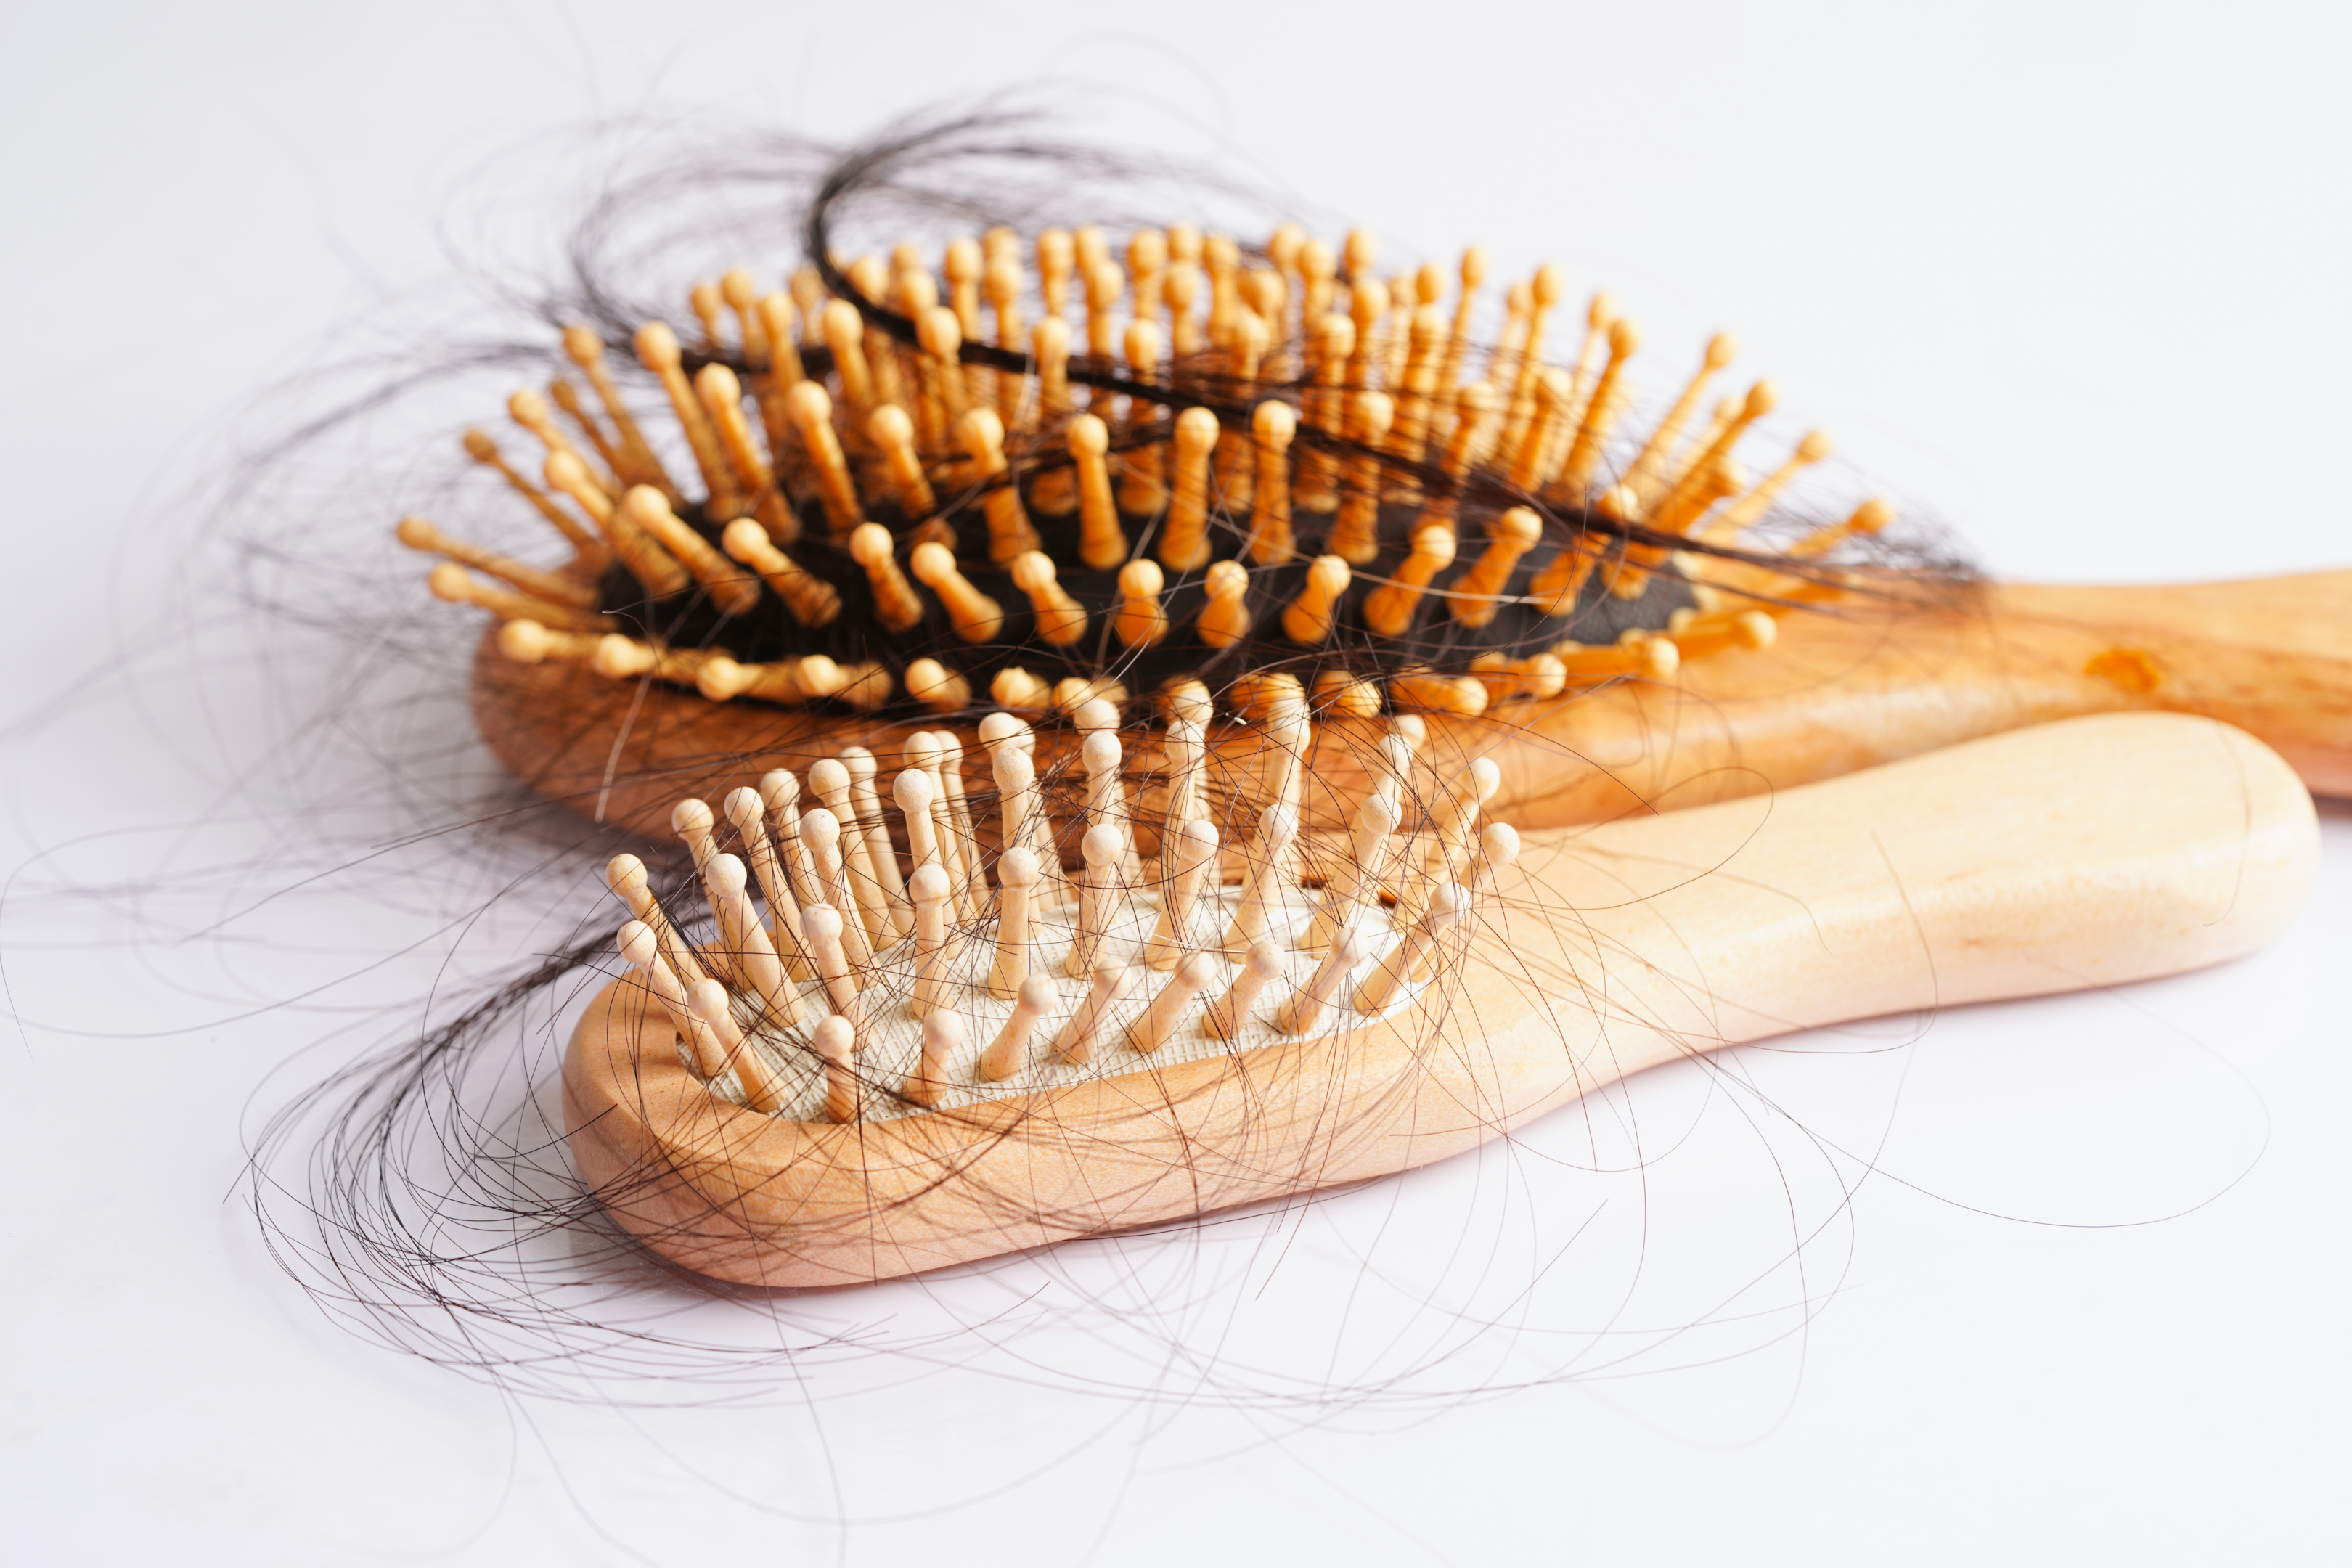  Excessive hair in the comb or brush signifies that you are rapidly losing hair.